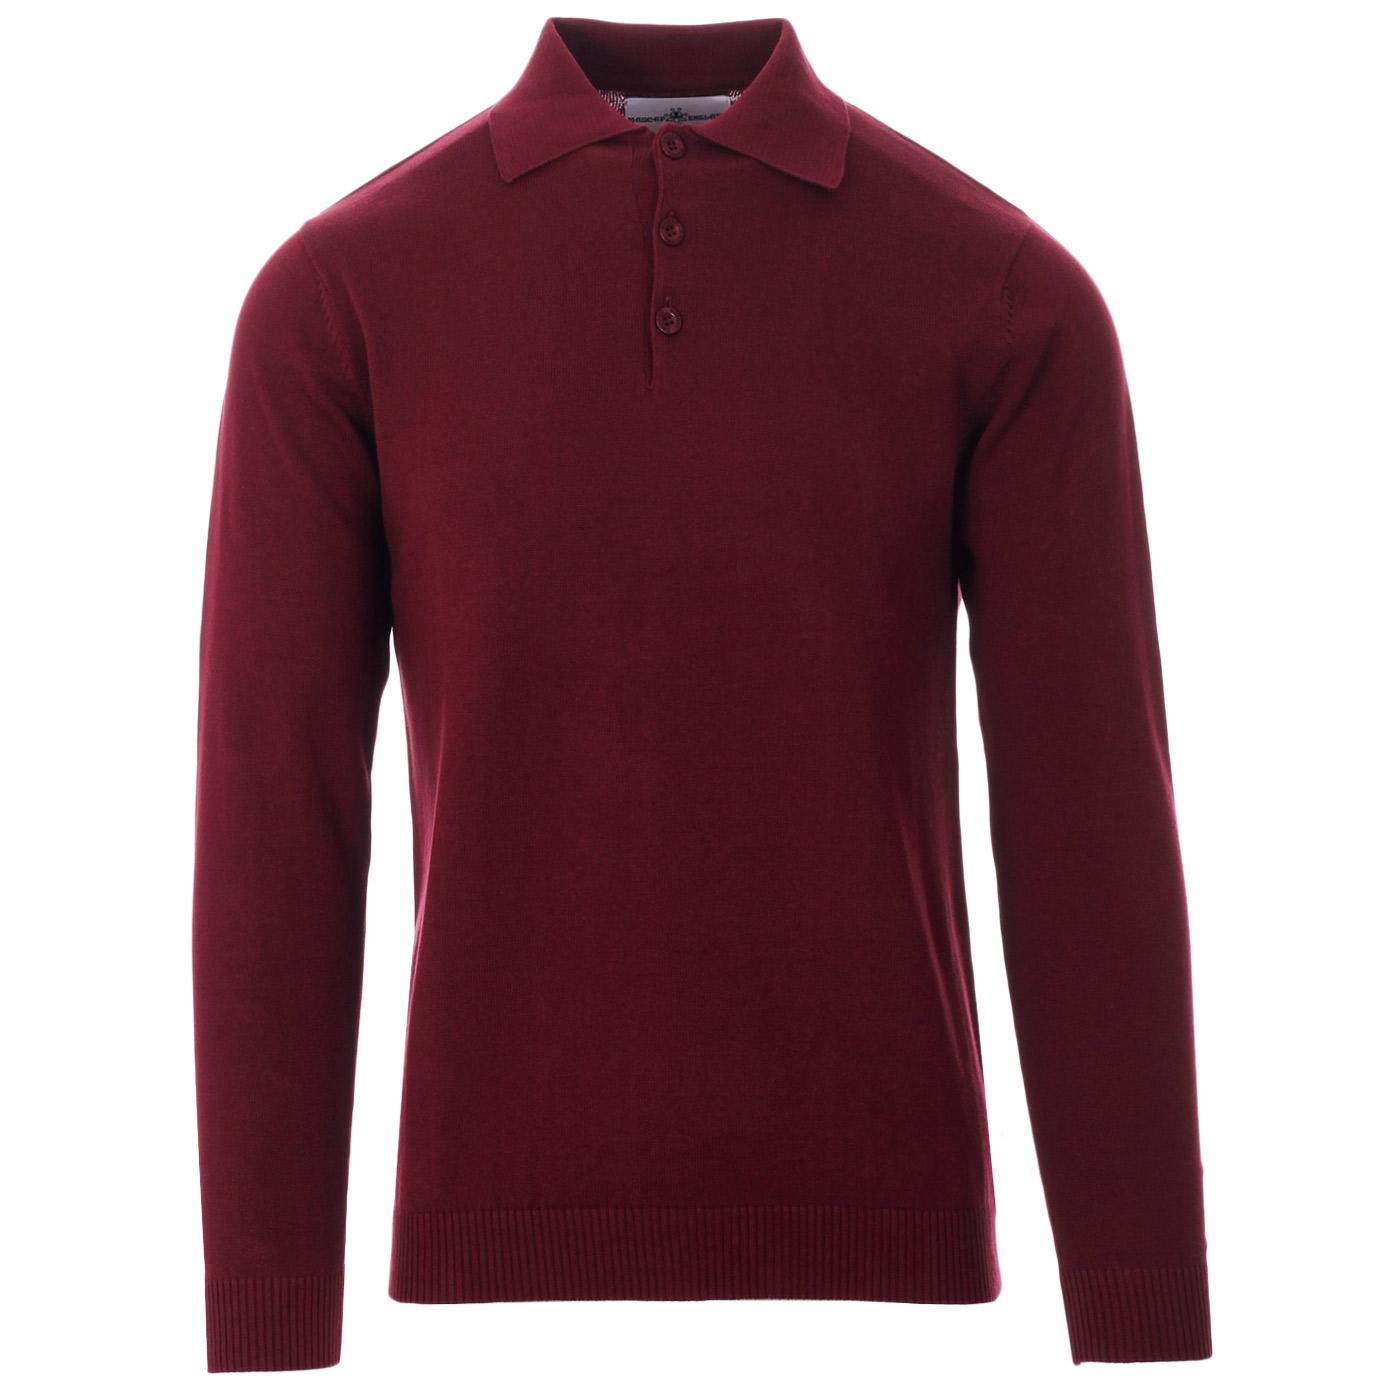 Madcap England Brando 60s Mod Knitted Polo Shirt in Zinfandel